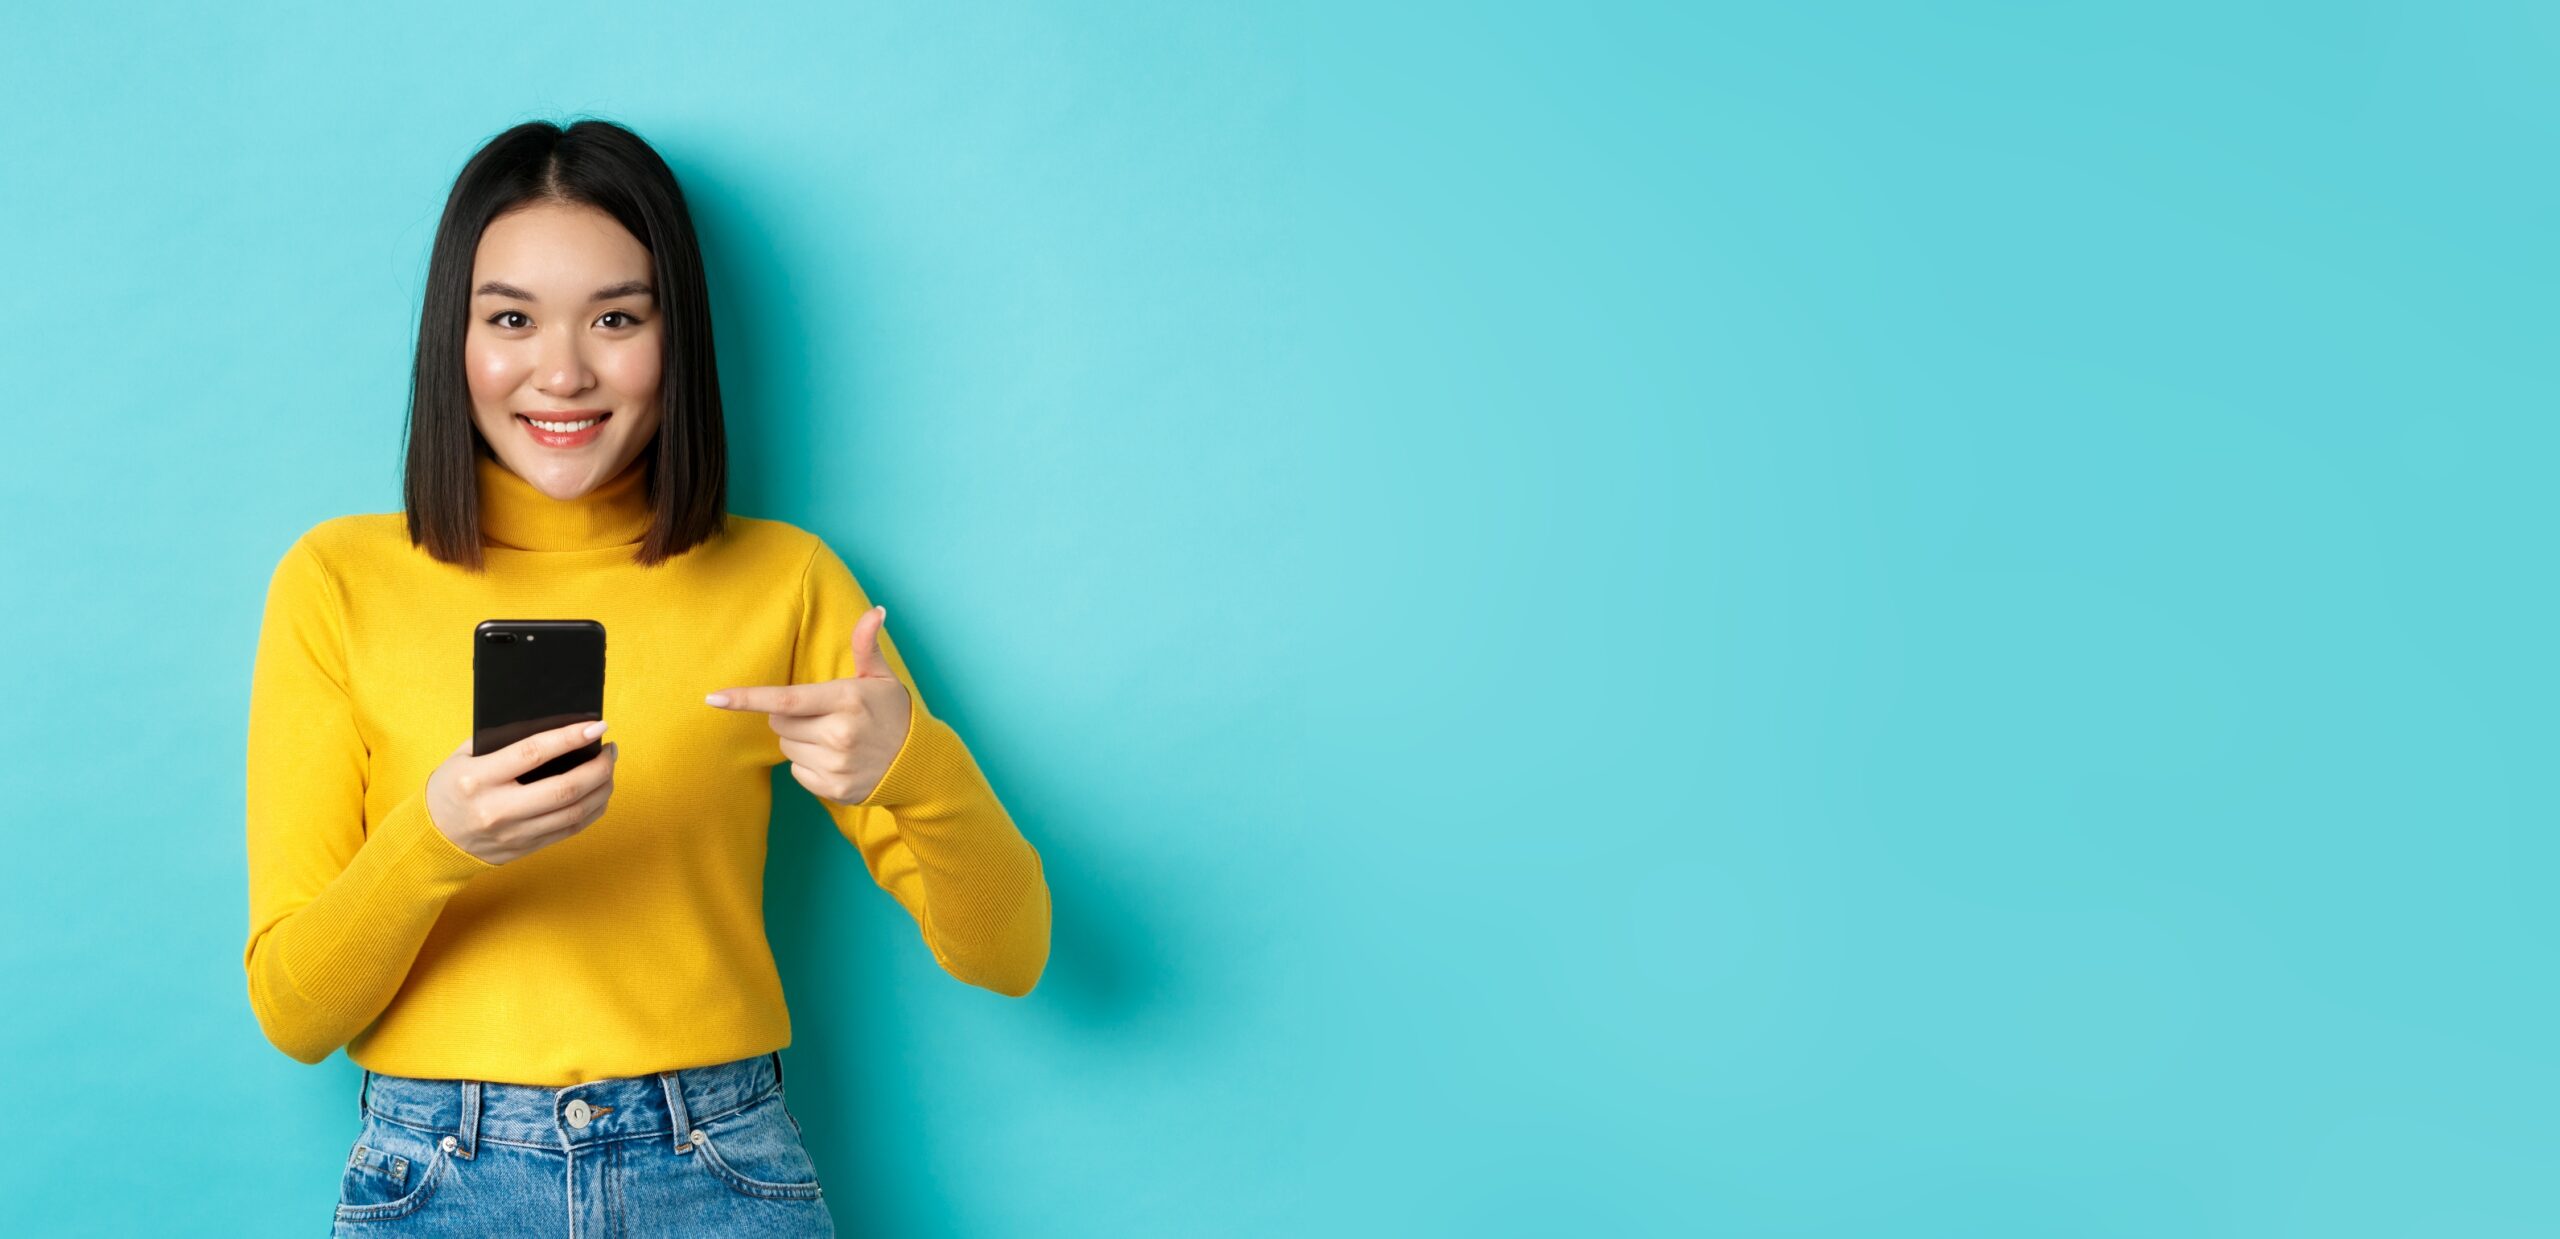 E-commerce and online shopping concept. Cute asian woman in yellow sweater pointing at smartphone, smiling at camera, standing over blue background.